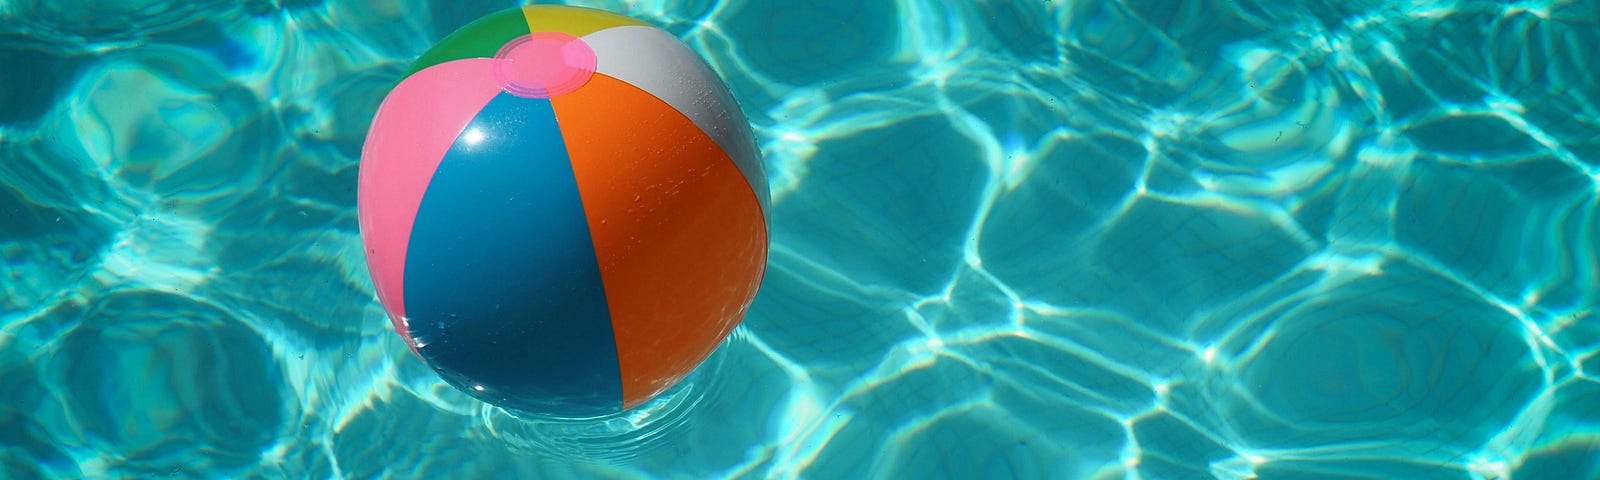 A turquoise swimming pool with a red, blue and gray beach ball in it